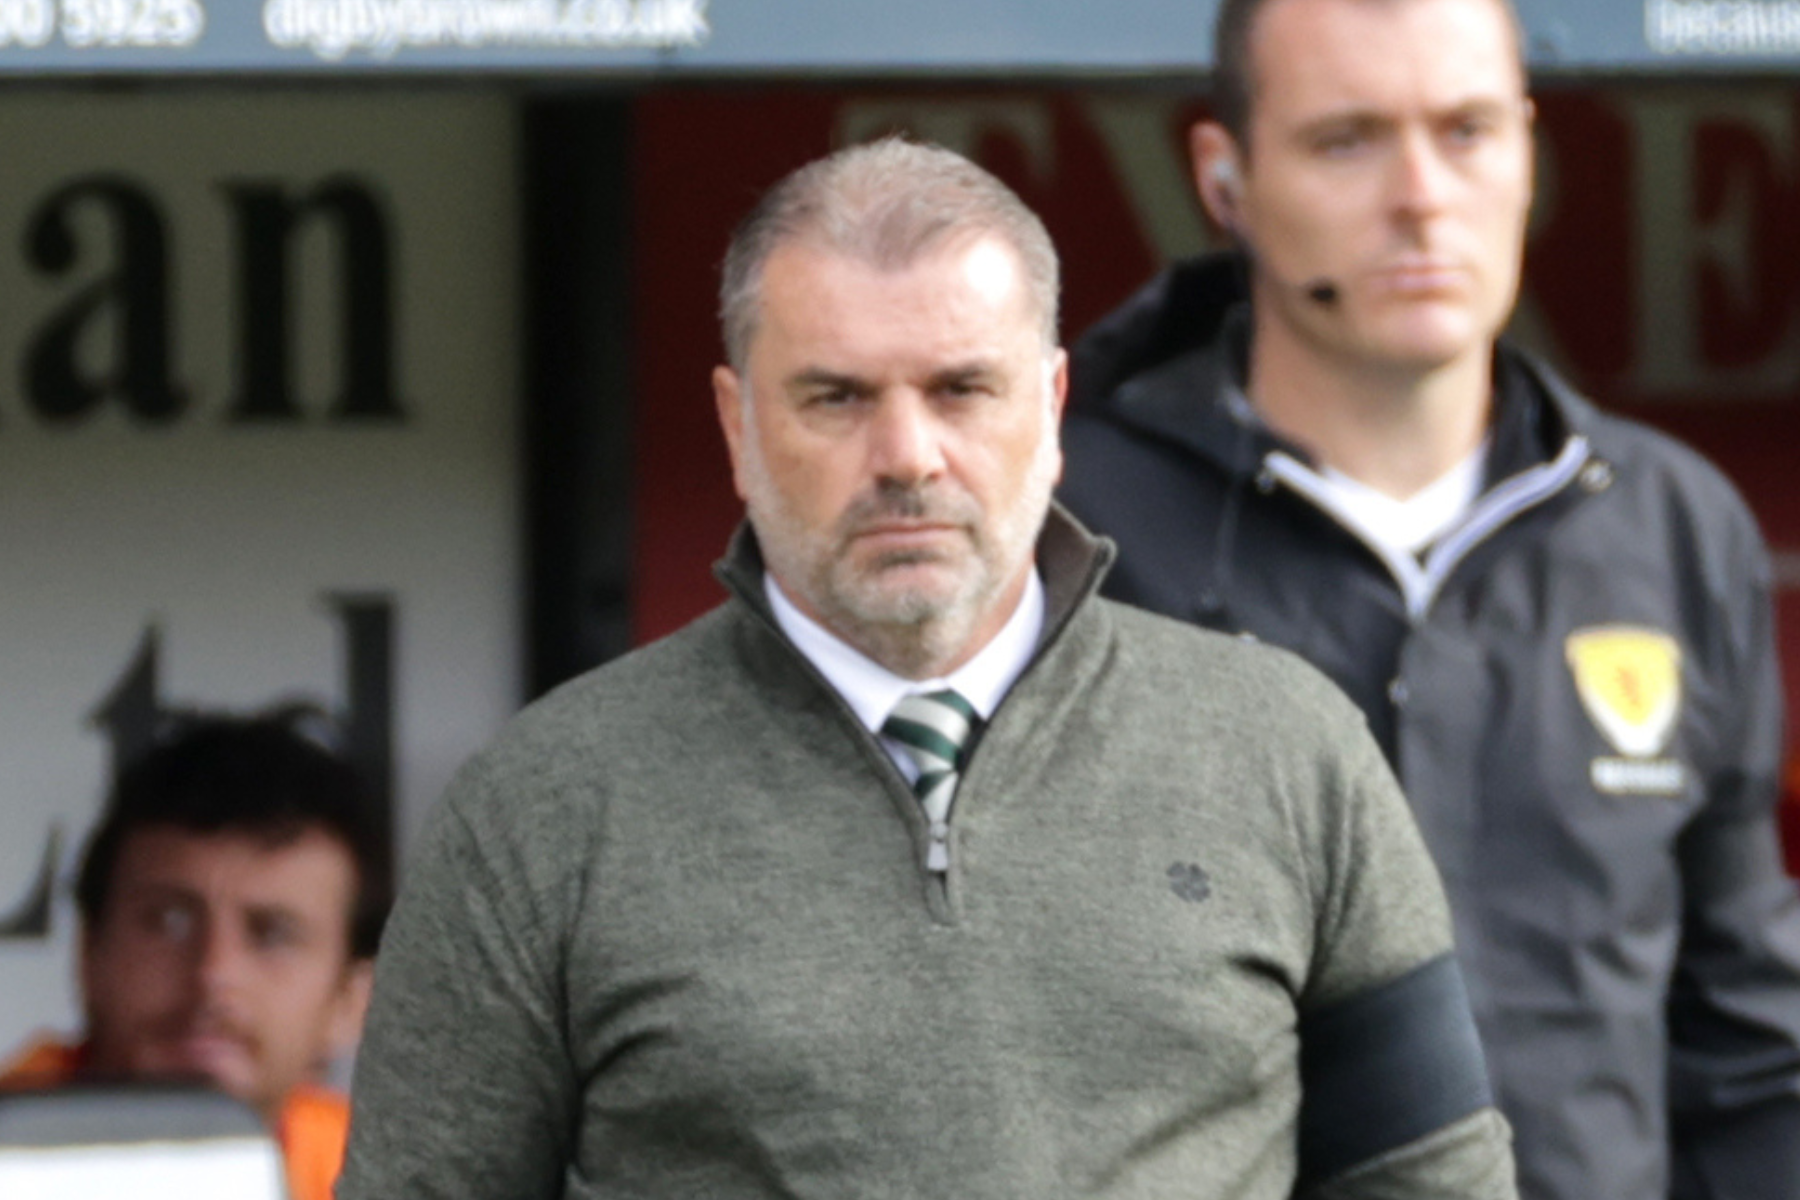 Celtic manager Ange Postecoglou admits it would be 'boring' if his team won every week